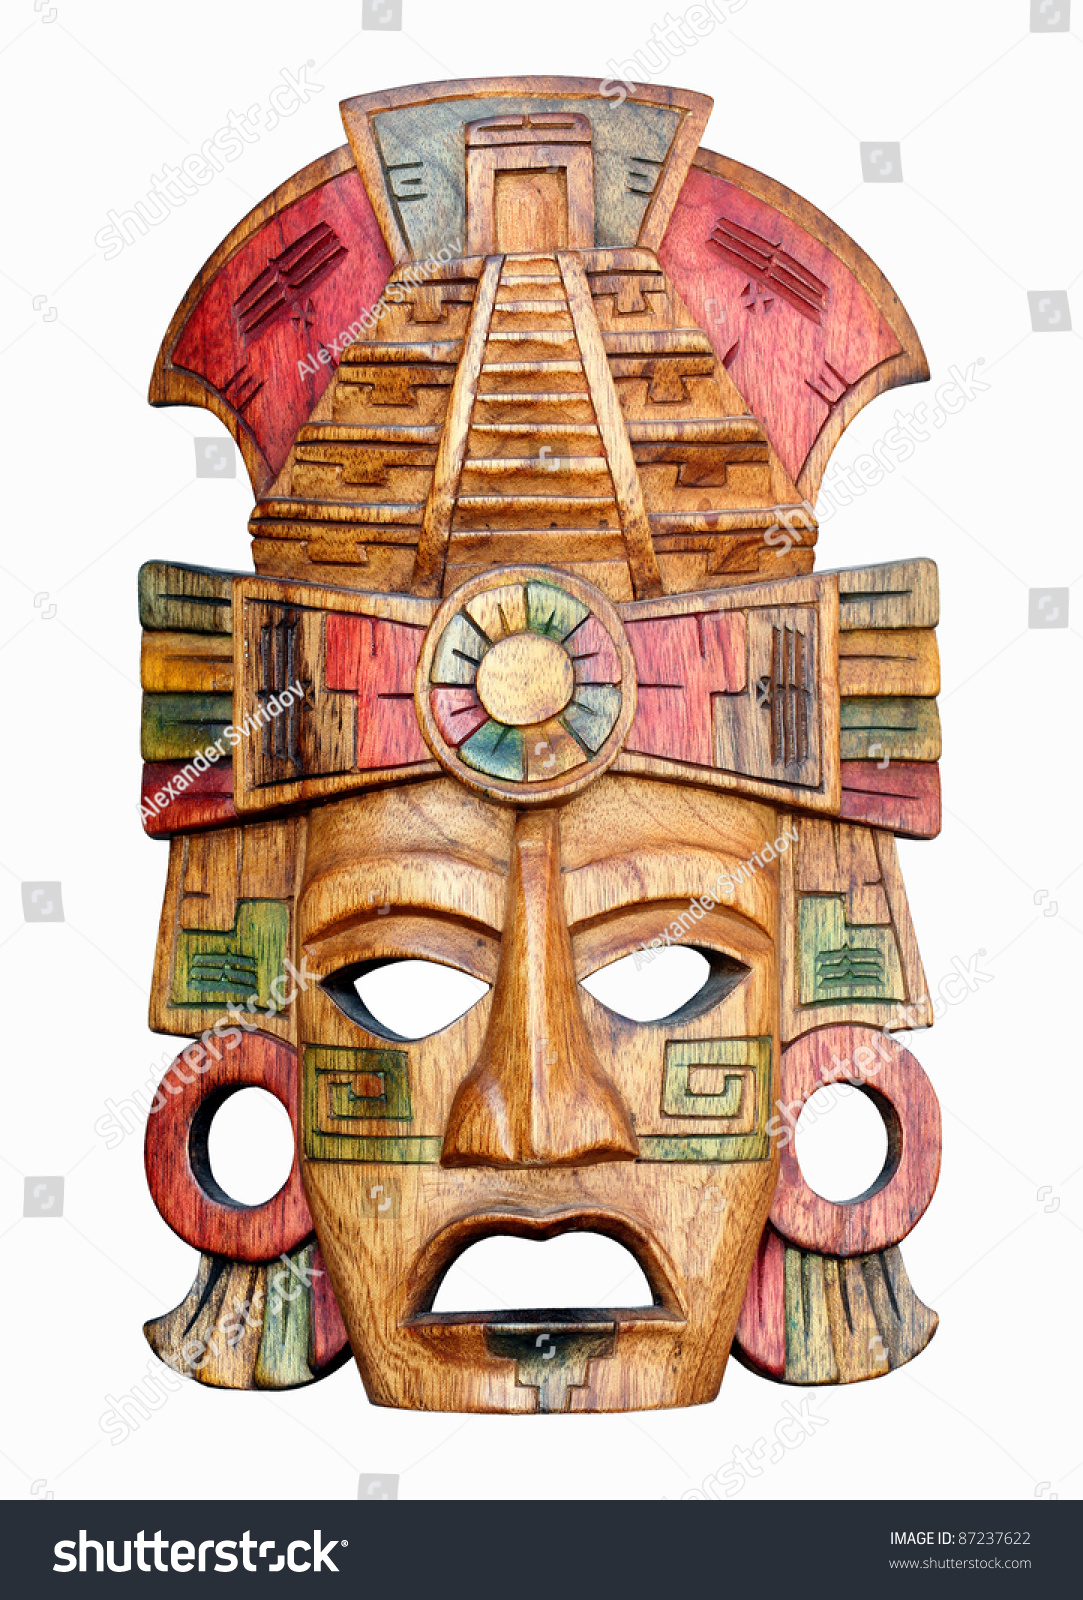 Hand carved wooden Mayan mask isolated on a white background #87237622